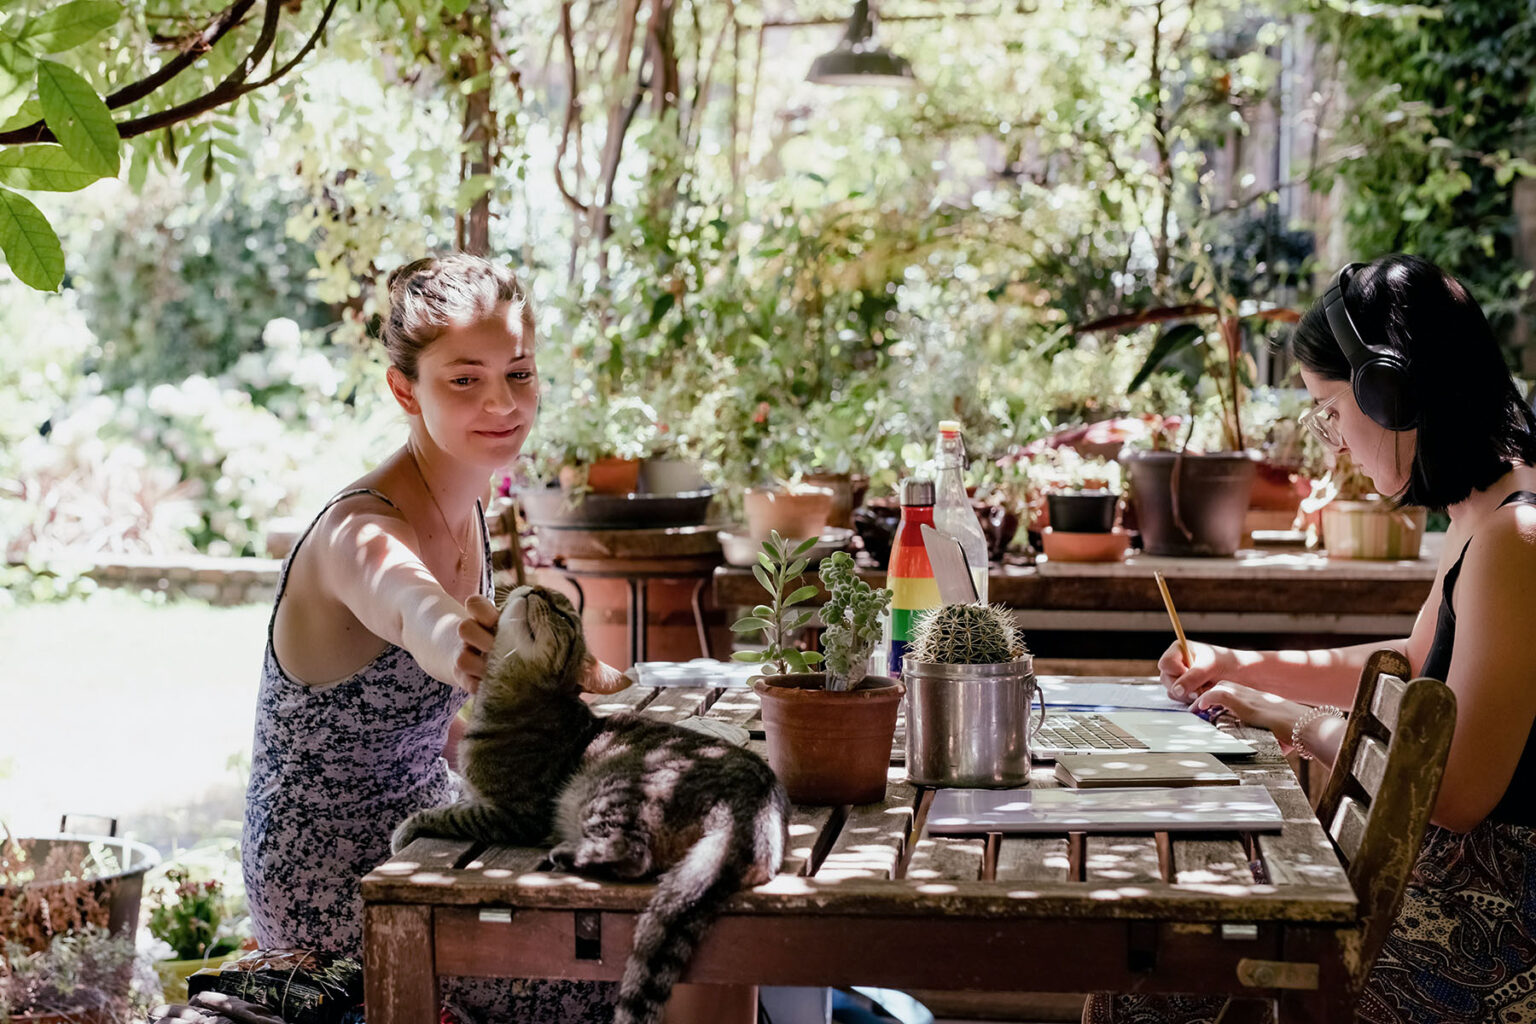 Two women sitting in the garden at a table, working in the shade on a sunny day. One is petting a cat on the table.